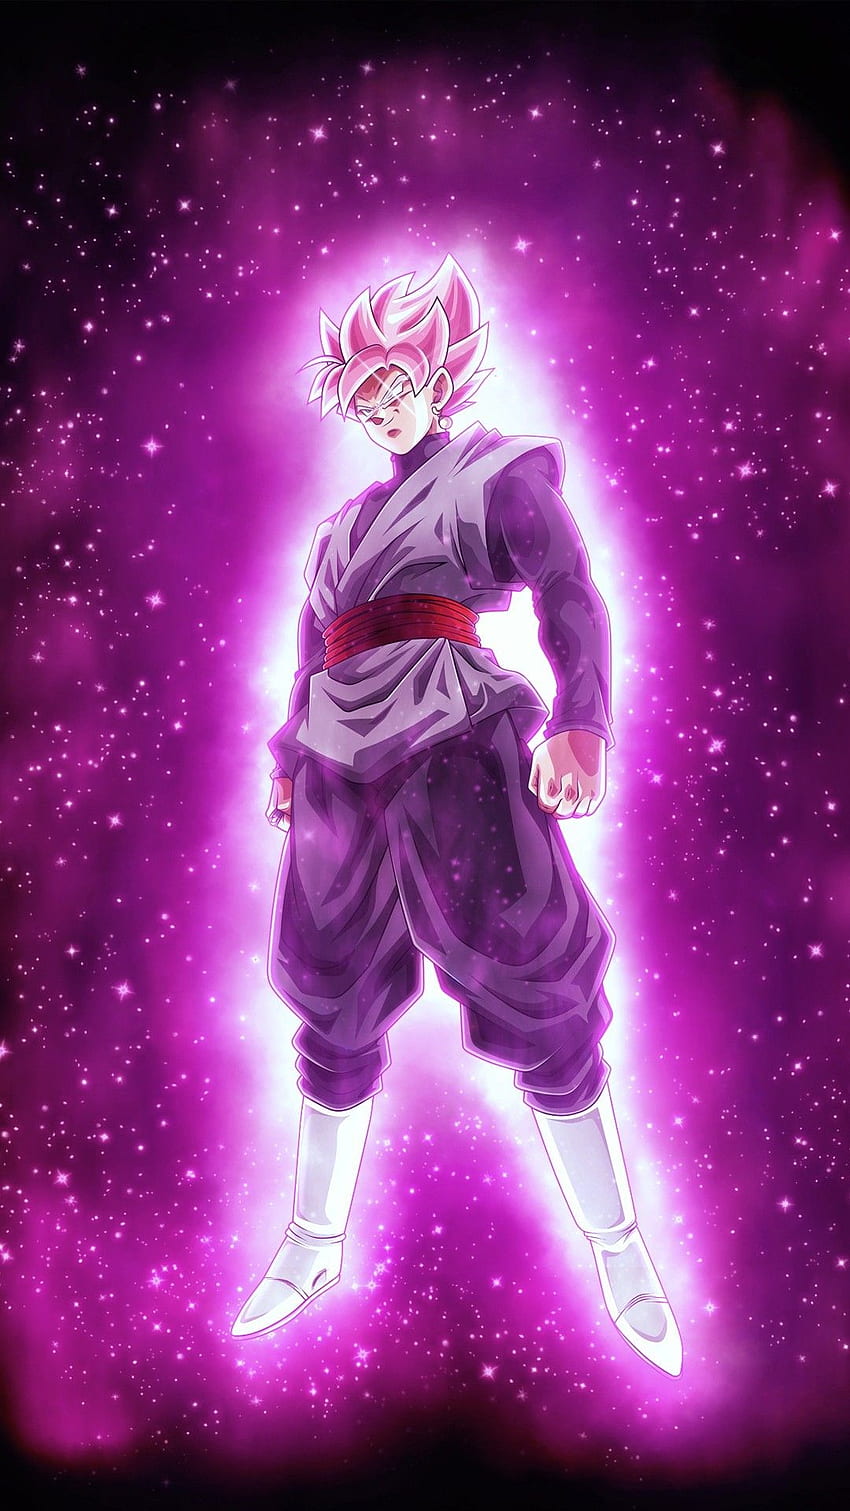 X 上的#WaywardSage：「Did Black's hair get more hot pink? Hey @Rialisms, Goku  Black here is copying your style #DragonBallSuper https://t.co/LMsznkhw8x」  / X